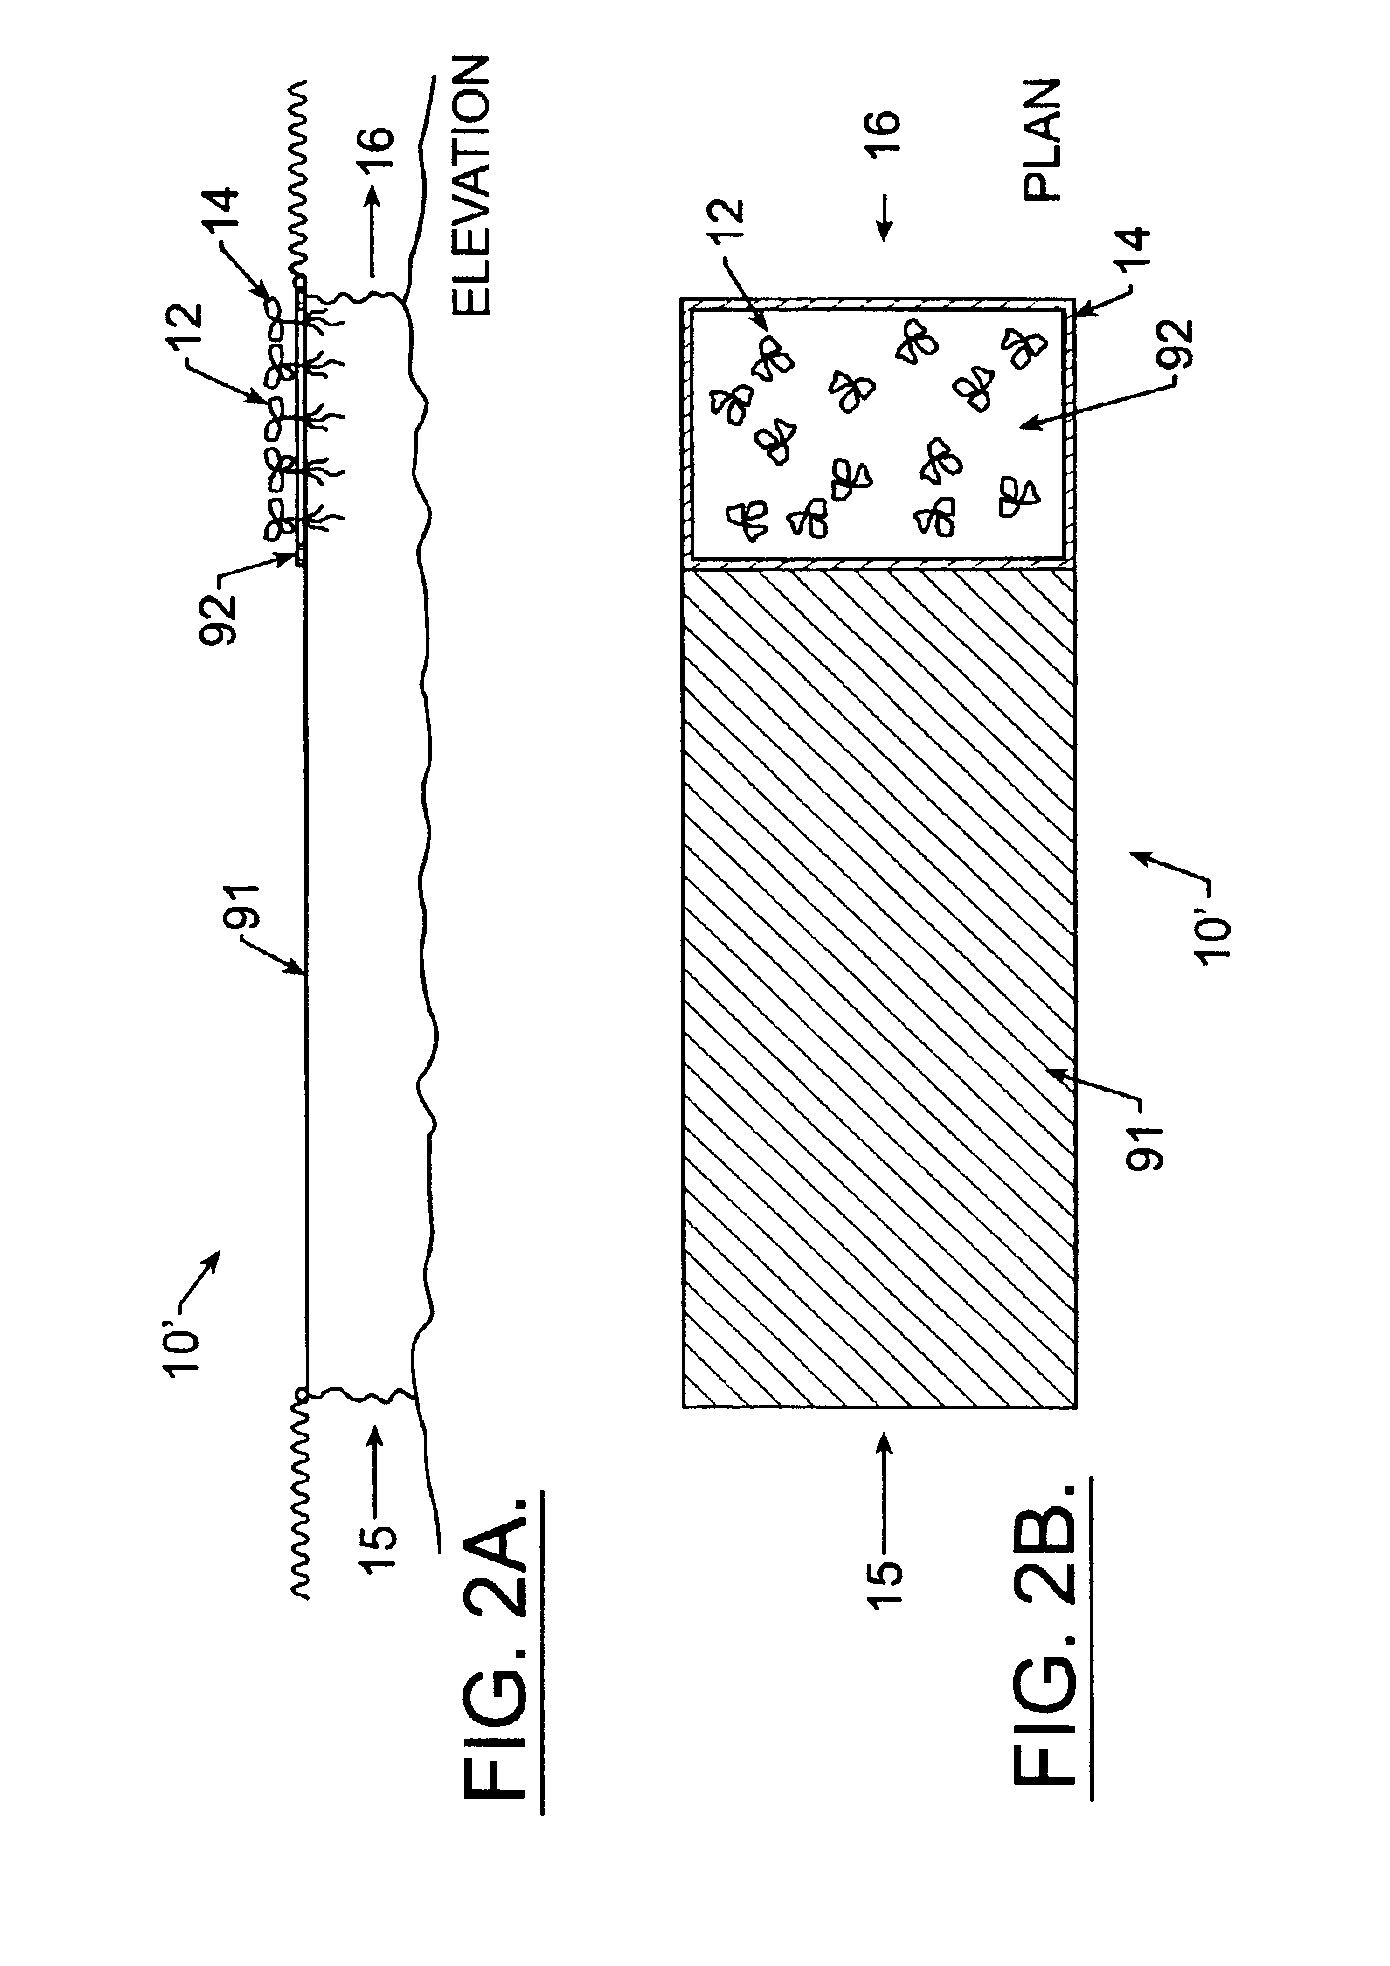 Algal and nutrient control system and method for a body of water